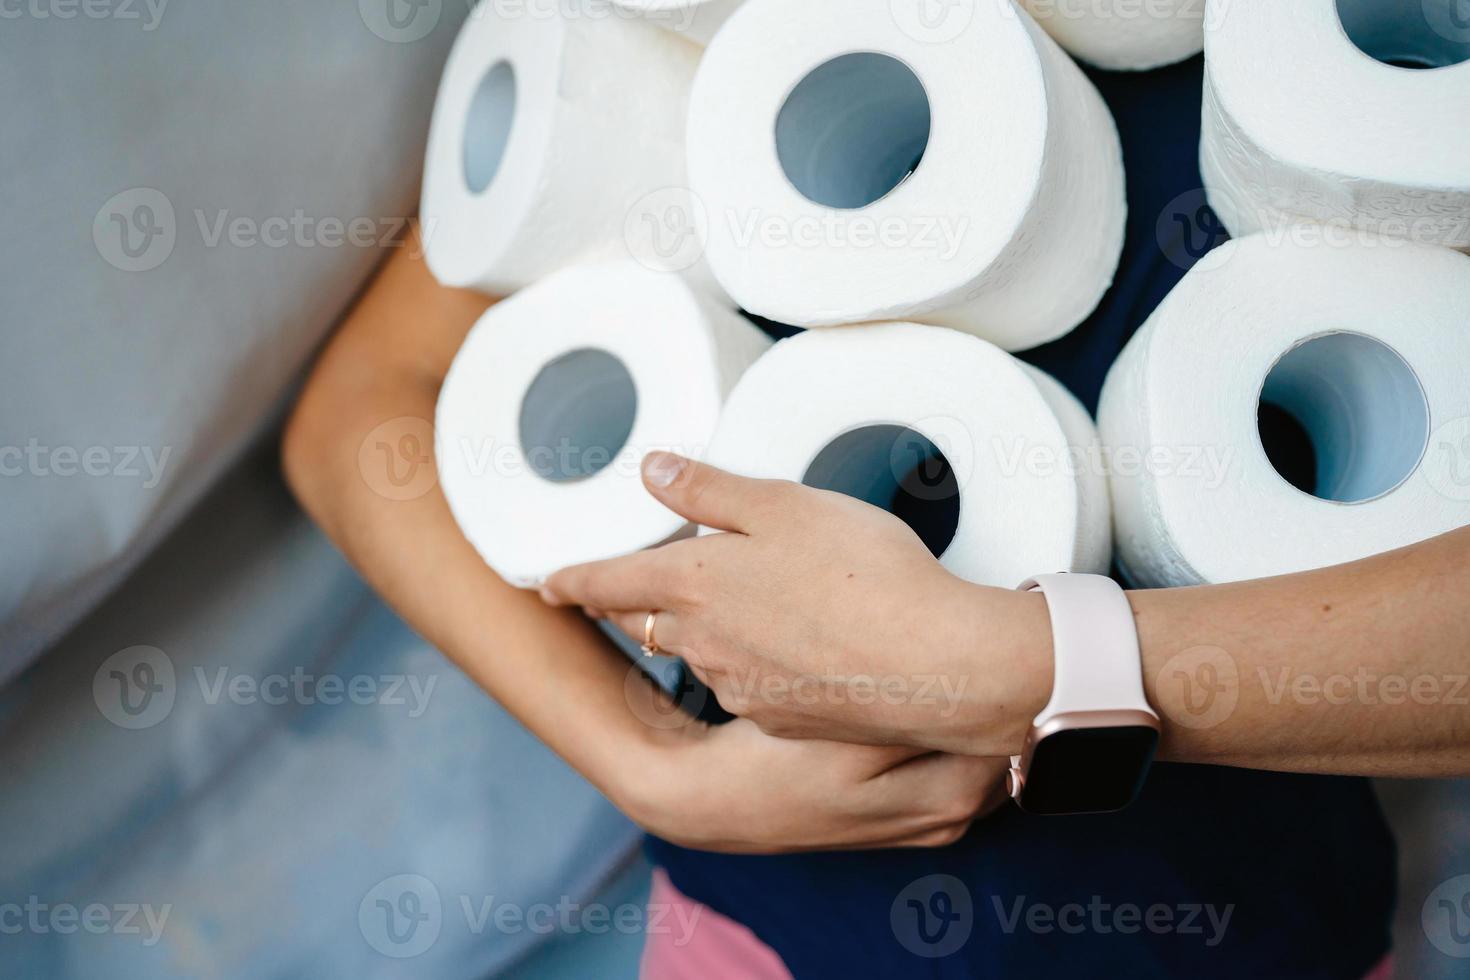 People are stocking up toilet paper for home quarantine from crownavirus. photo